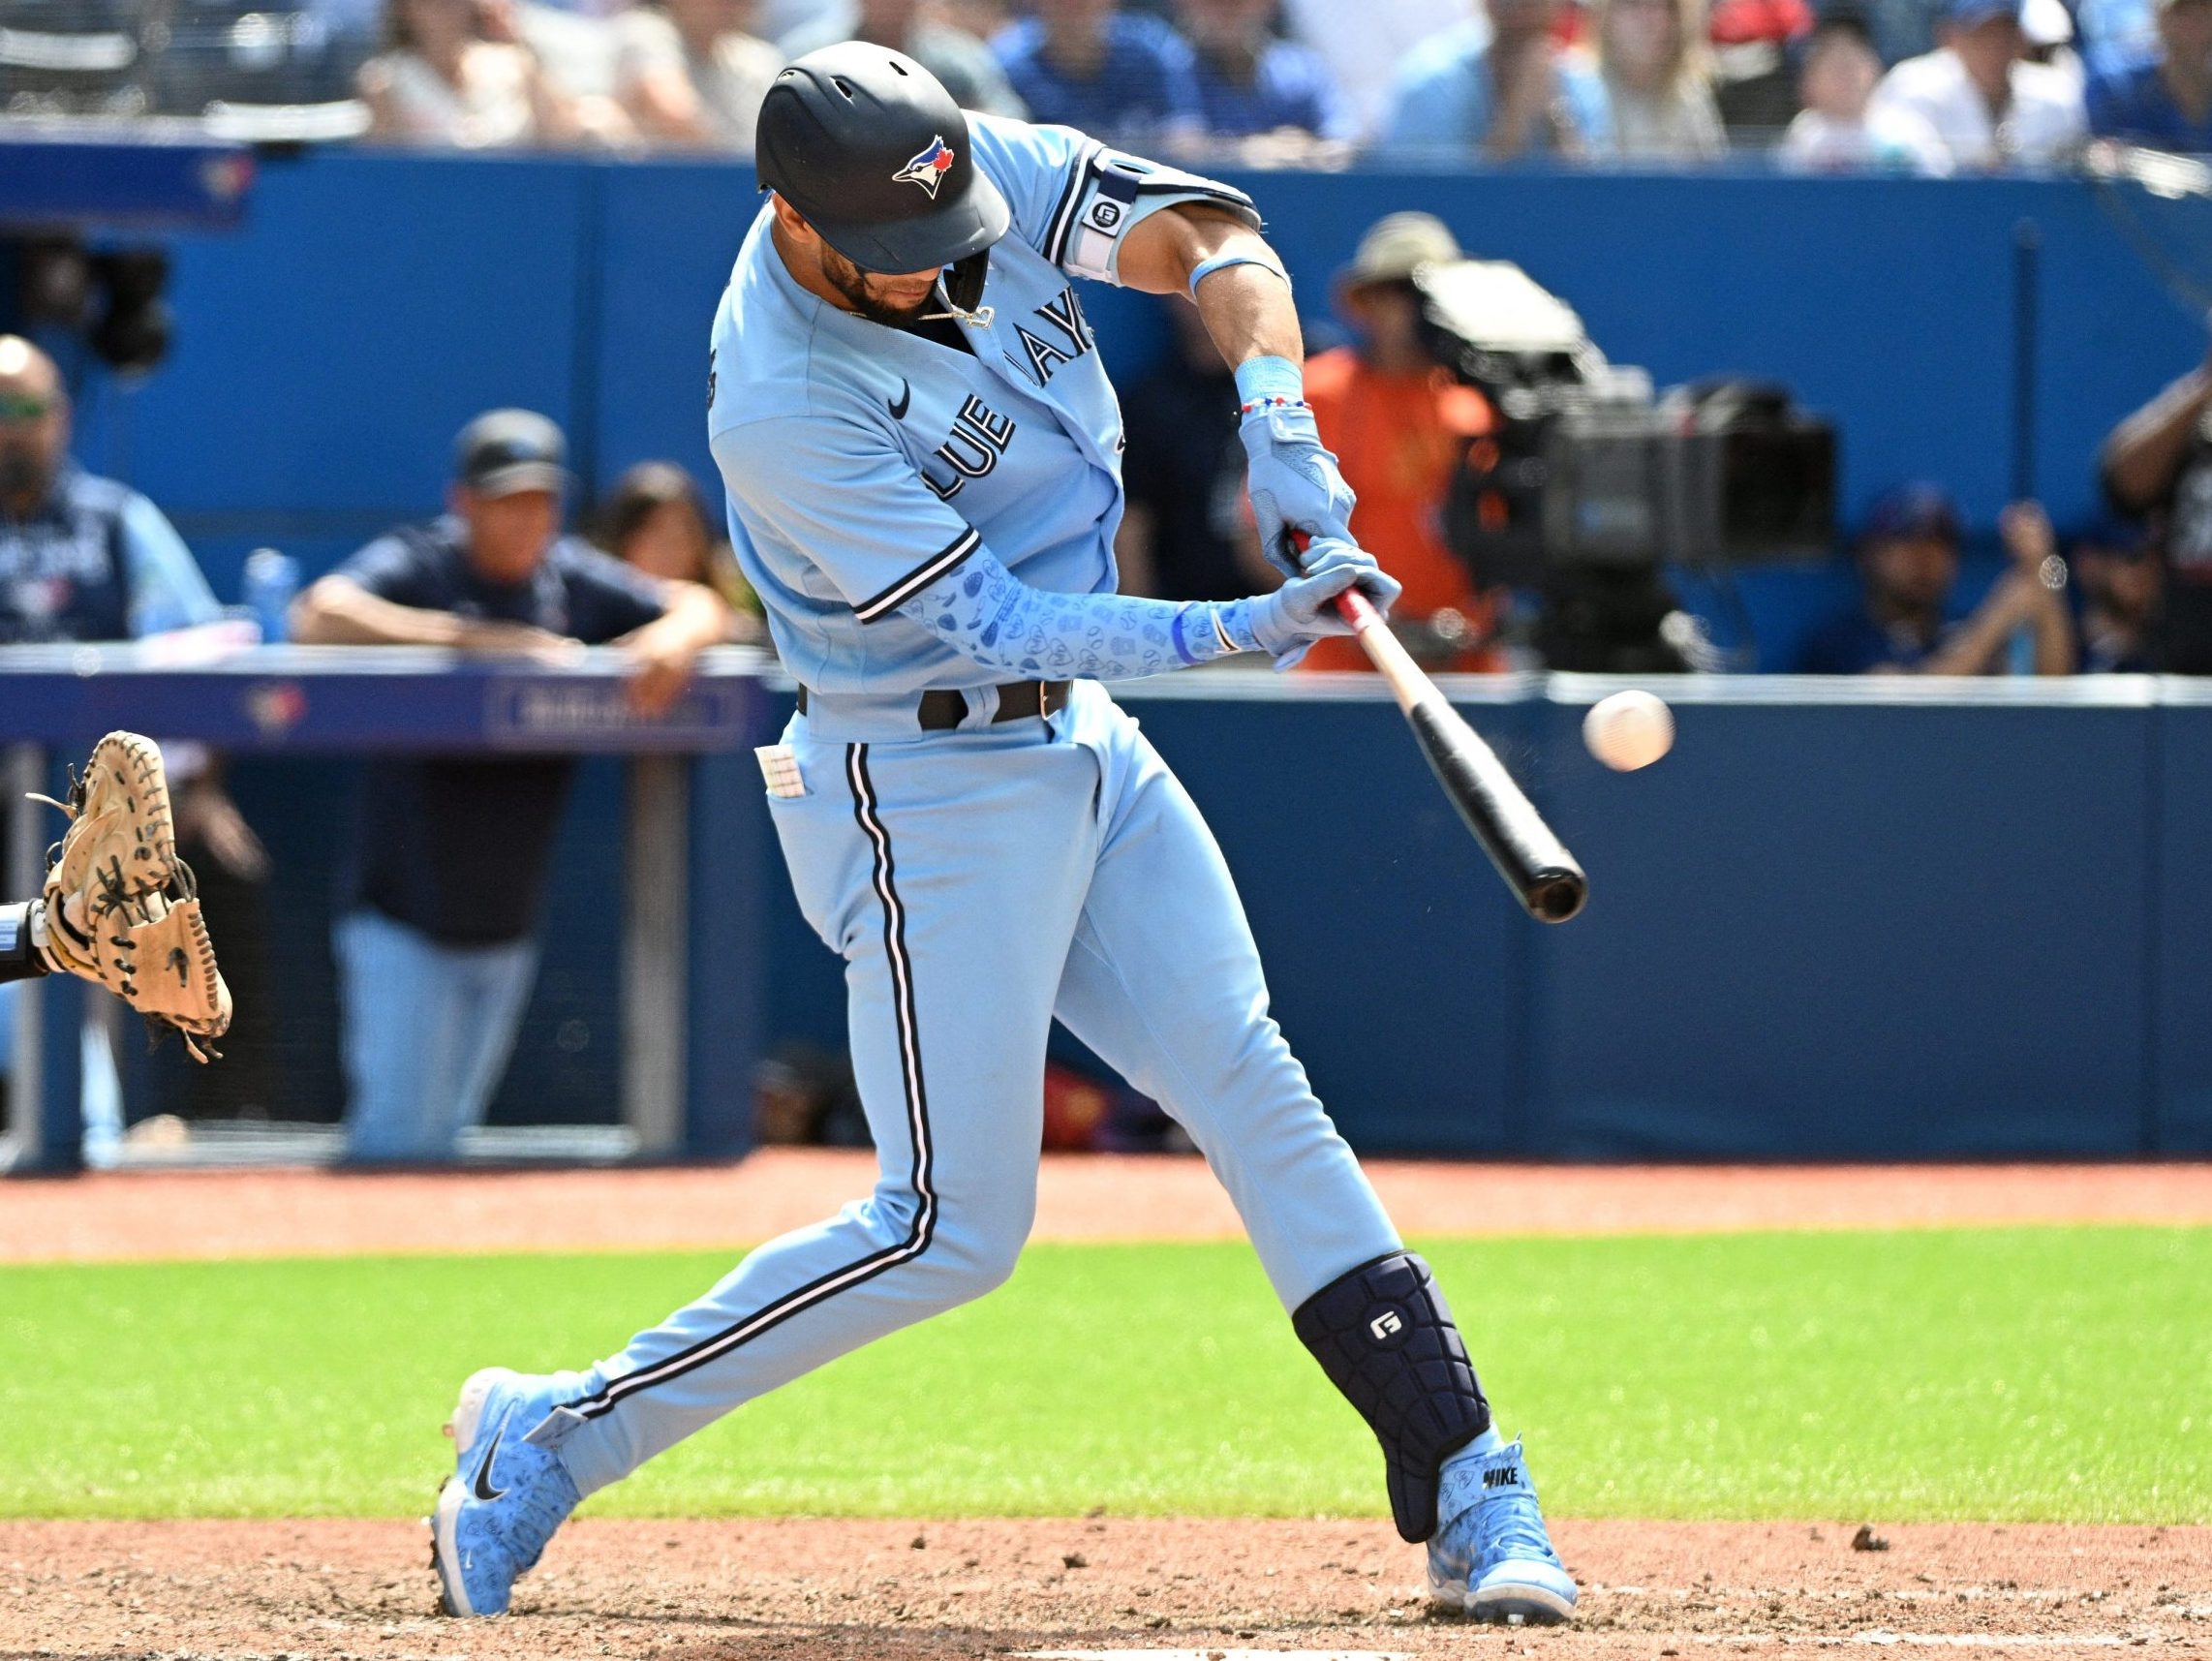 Blue Jays turn the power on to rally and outlast the Yankees